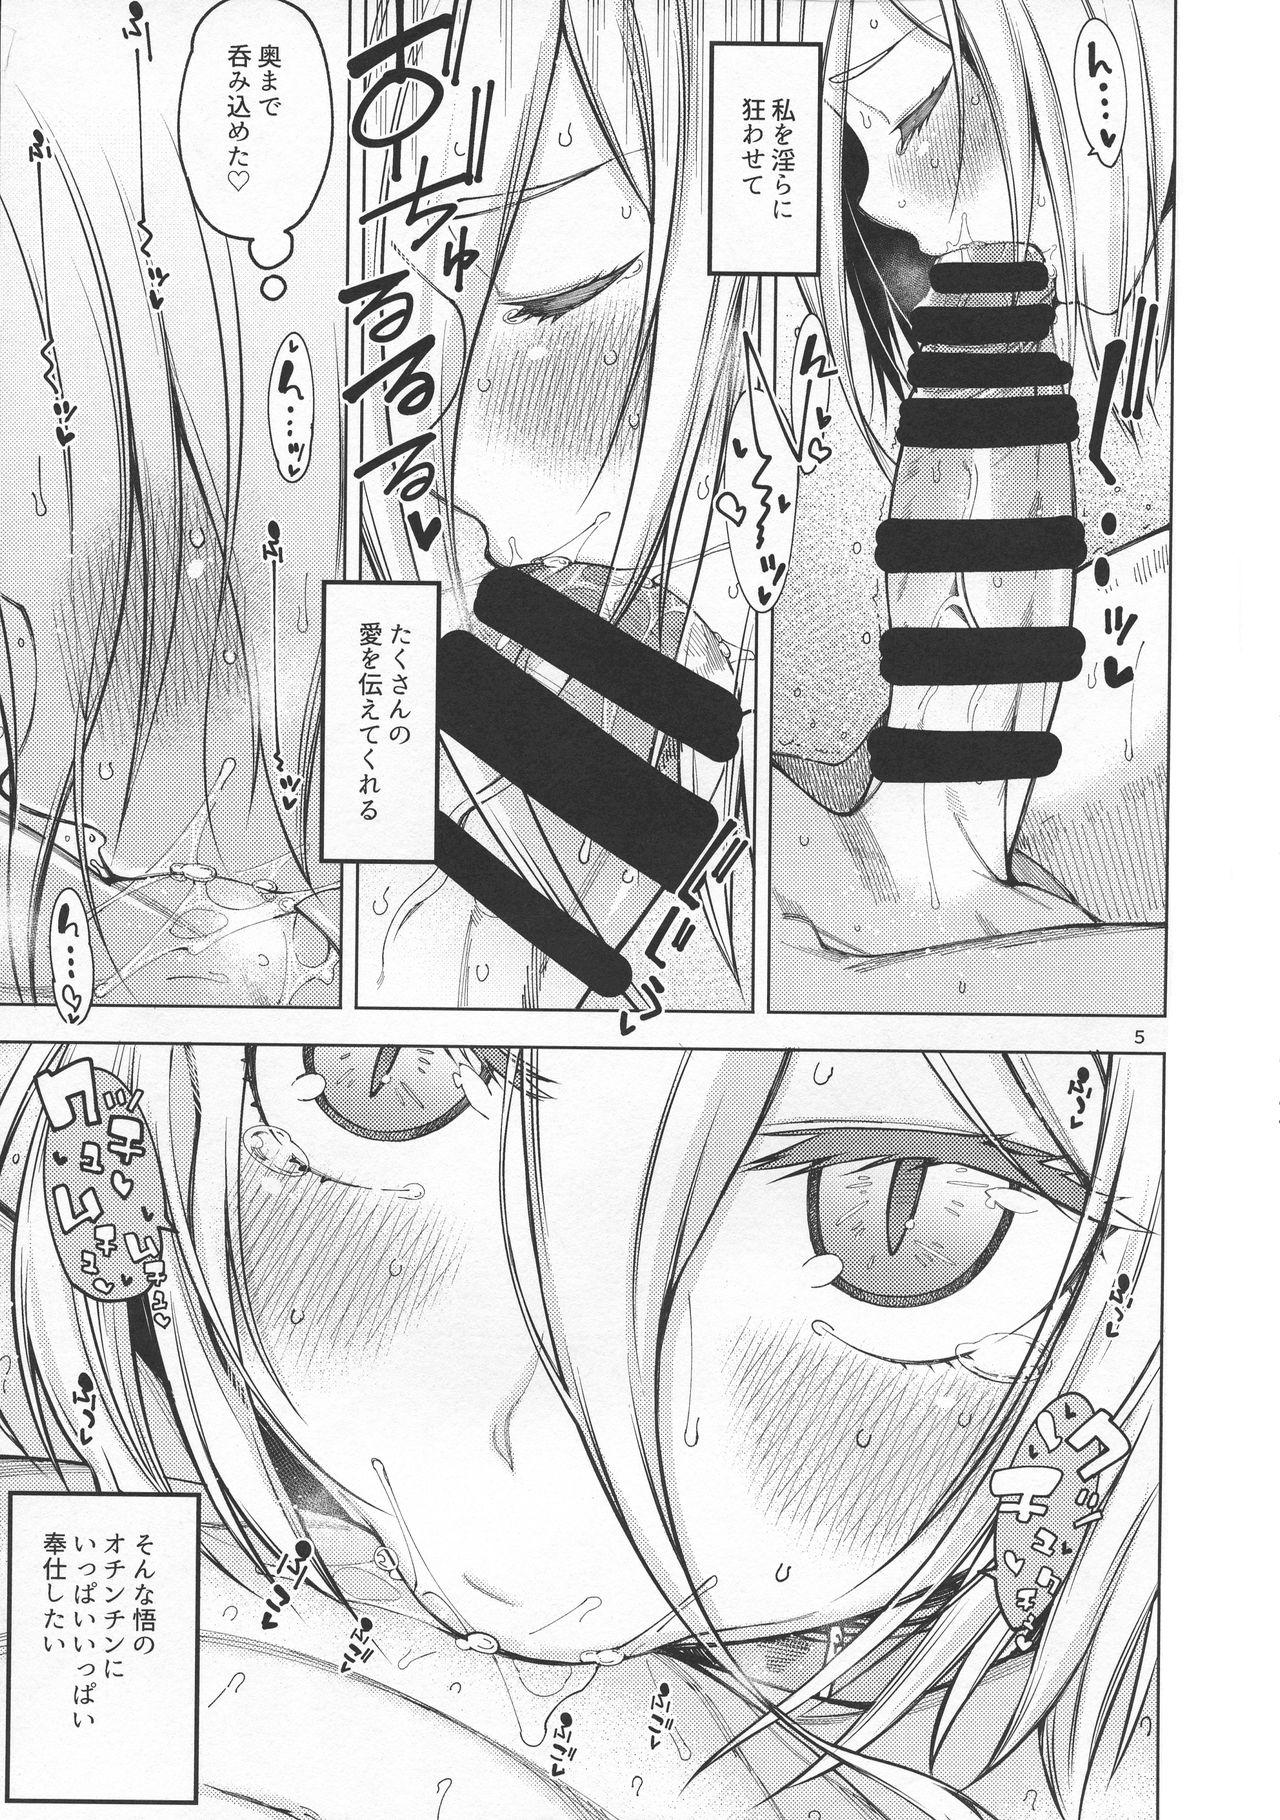 Sucking Cocks Sweet Time. - Overlord Tease - Page 7